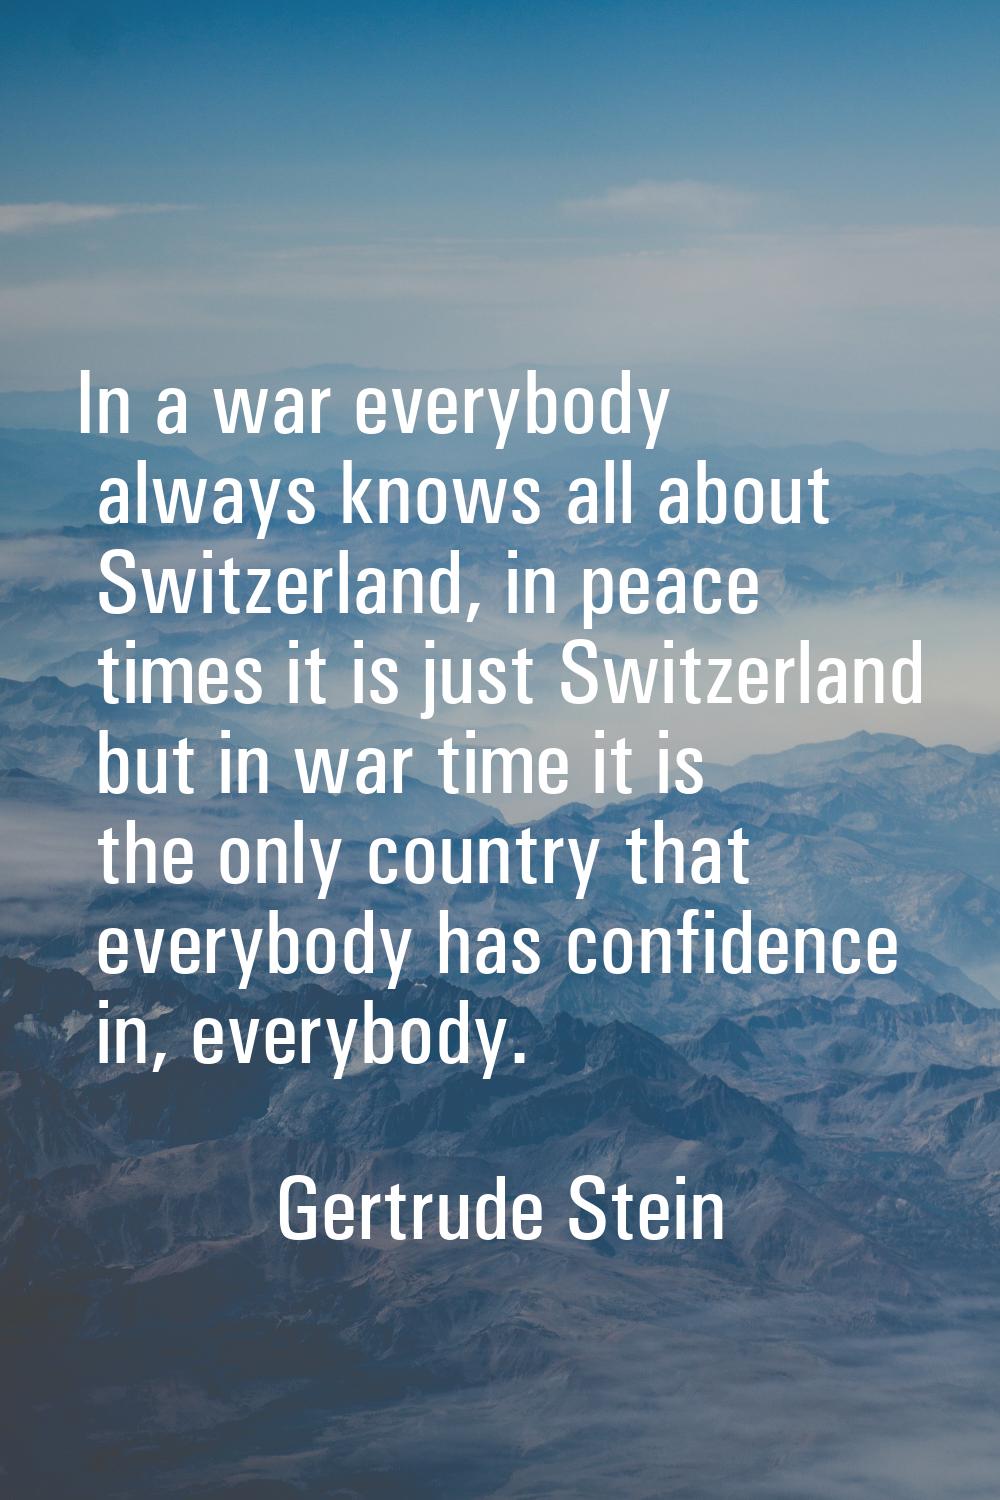 In a war everybody always knows all about Switzerland, in peace times it is just Switzerland but in